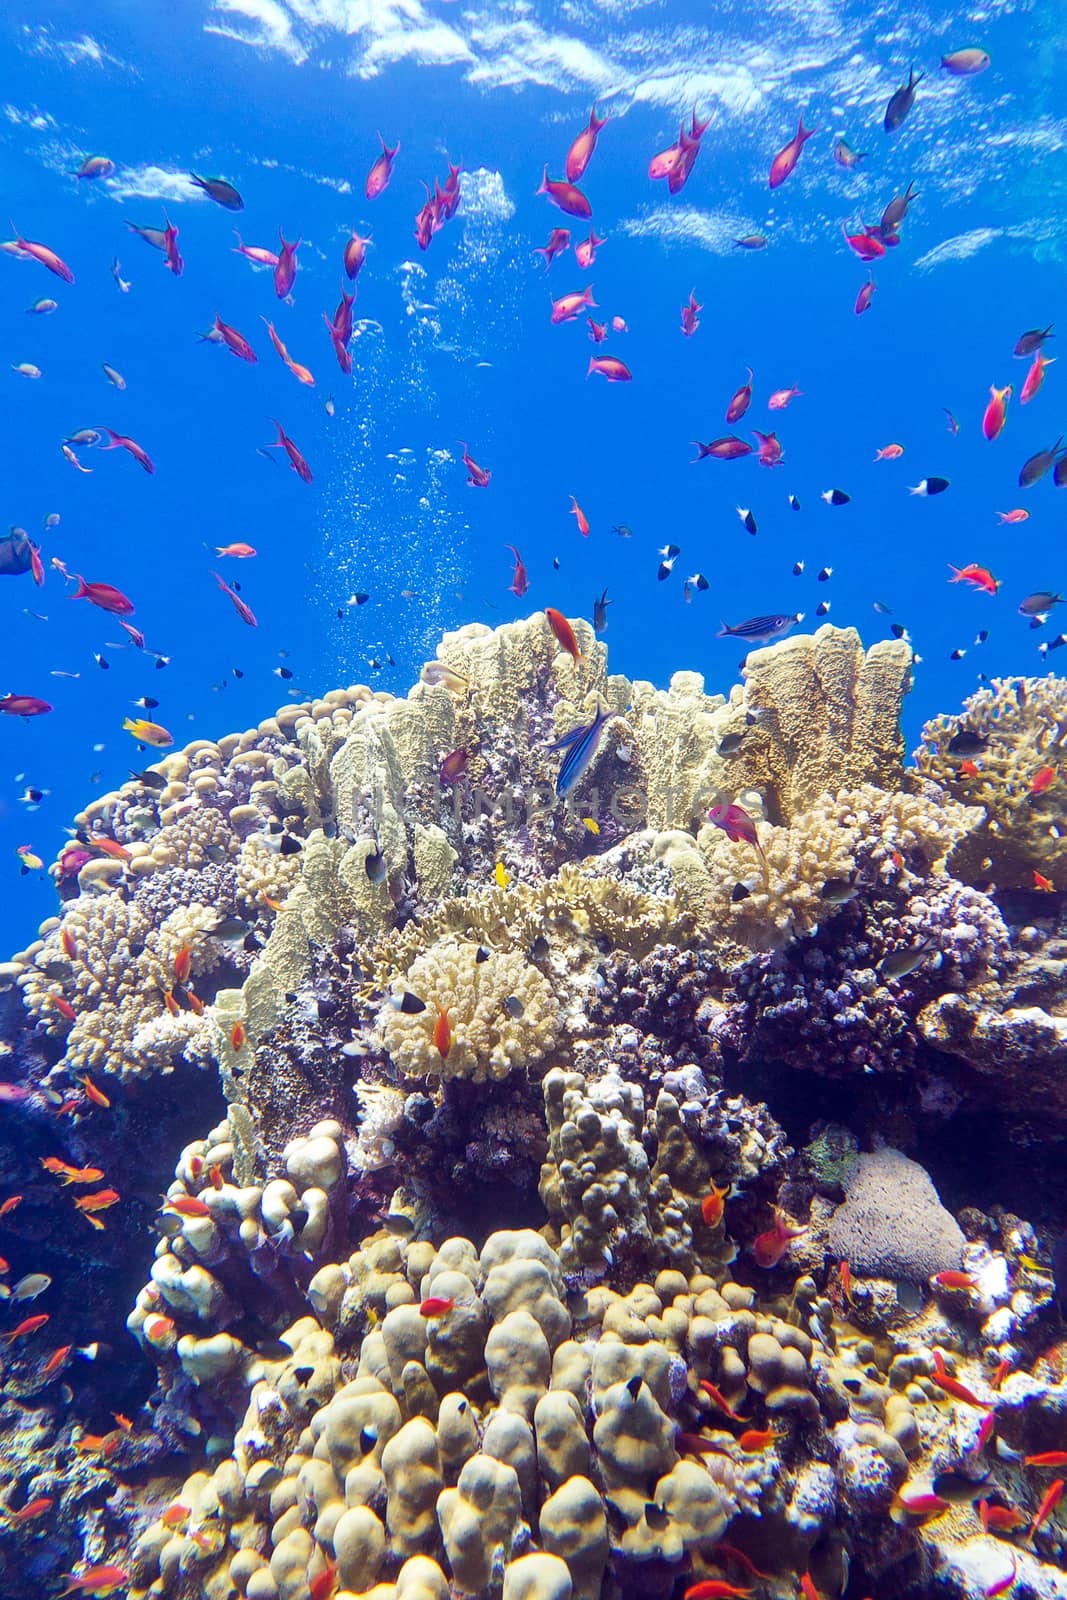 colorful coral reef with exotic fishes anthias at the bottom of tropical sea on blue water background